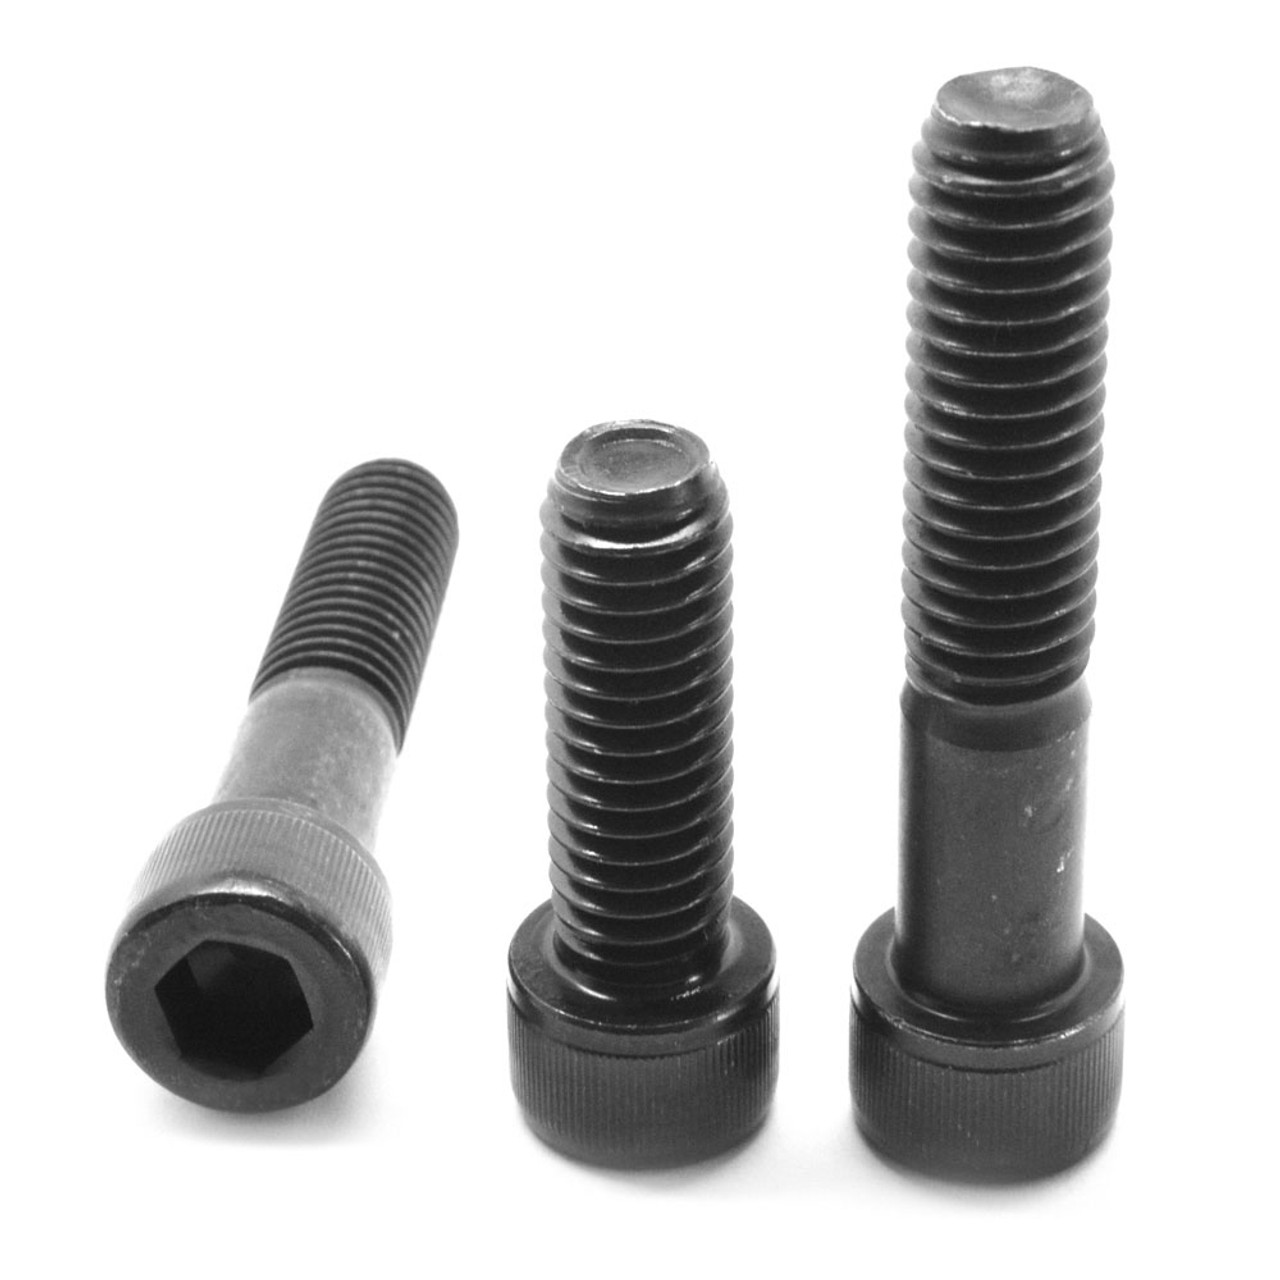 Black Oxide Alloy Steel Socket Head Cap Screw 1-3/4 Length 1/2-13 Thread Size Hex Socket Drive Pack of 50 1/2-13 Thread Size 1-3/4 Length Small Parts 5028CSP US Made Fully Threaded 